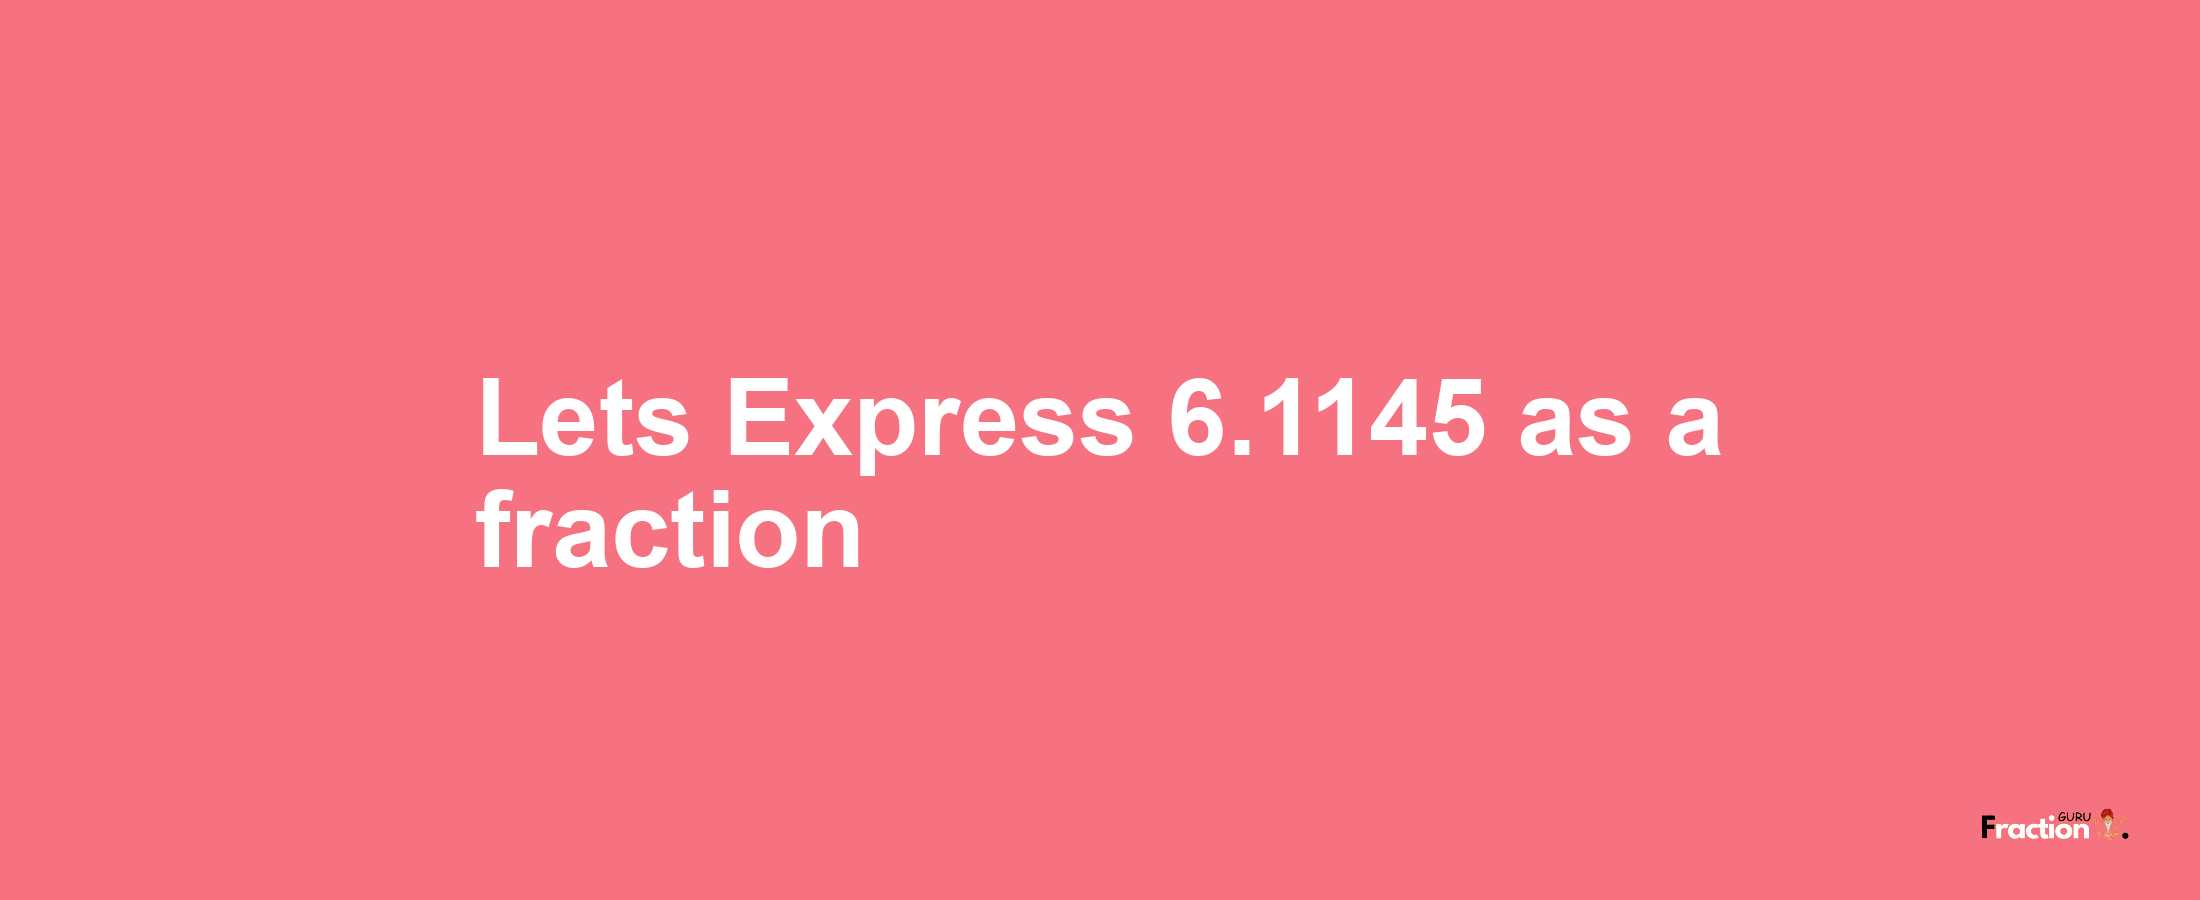 Lets Express 6.1145 as afraction